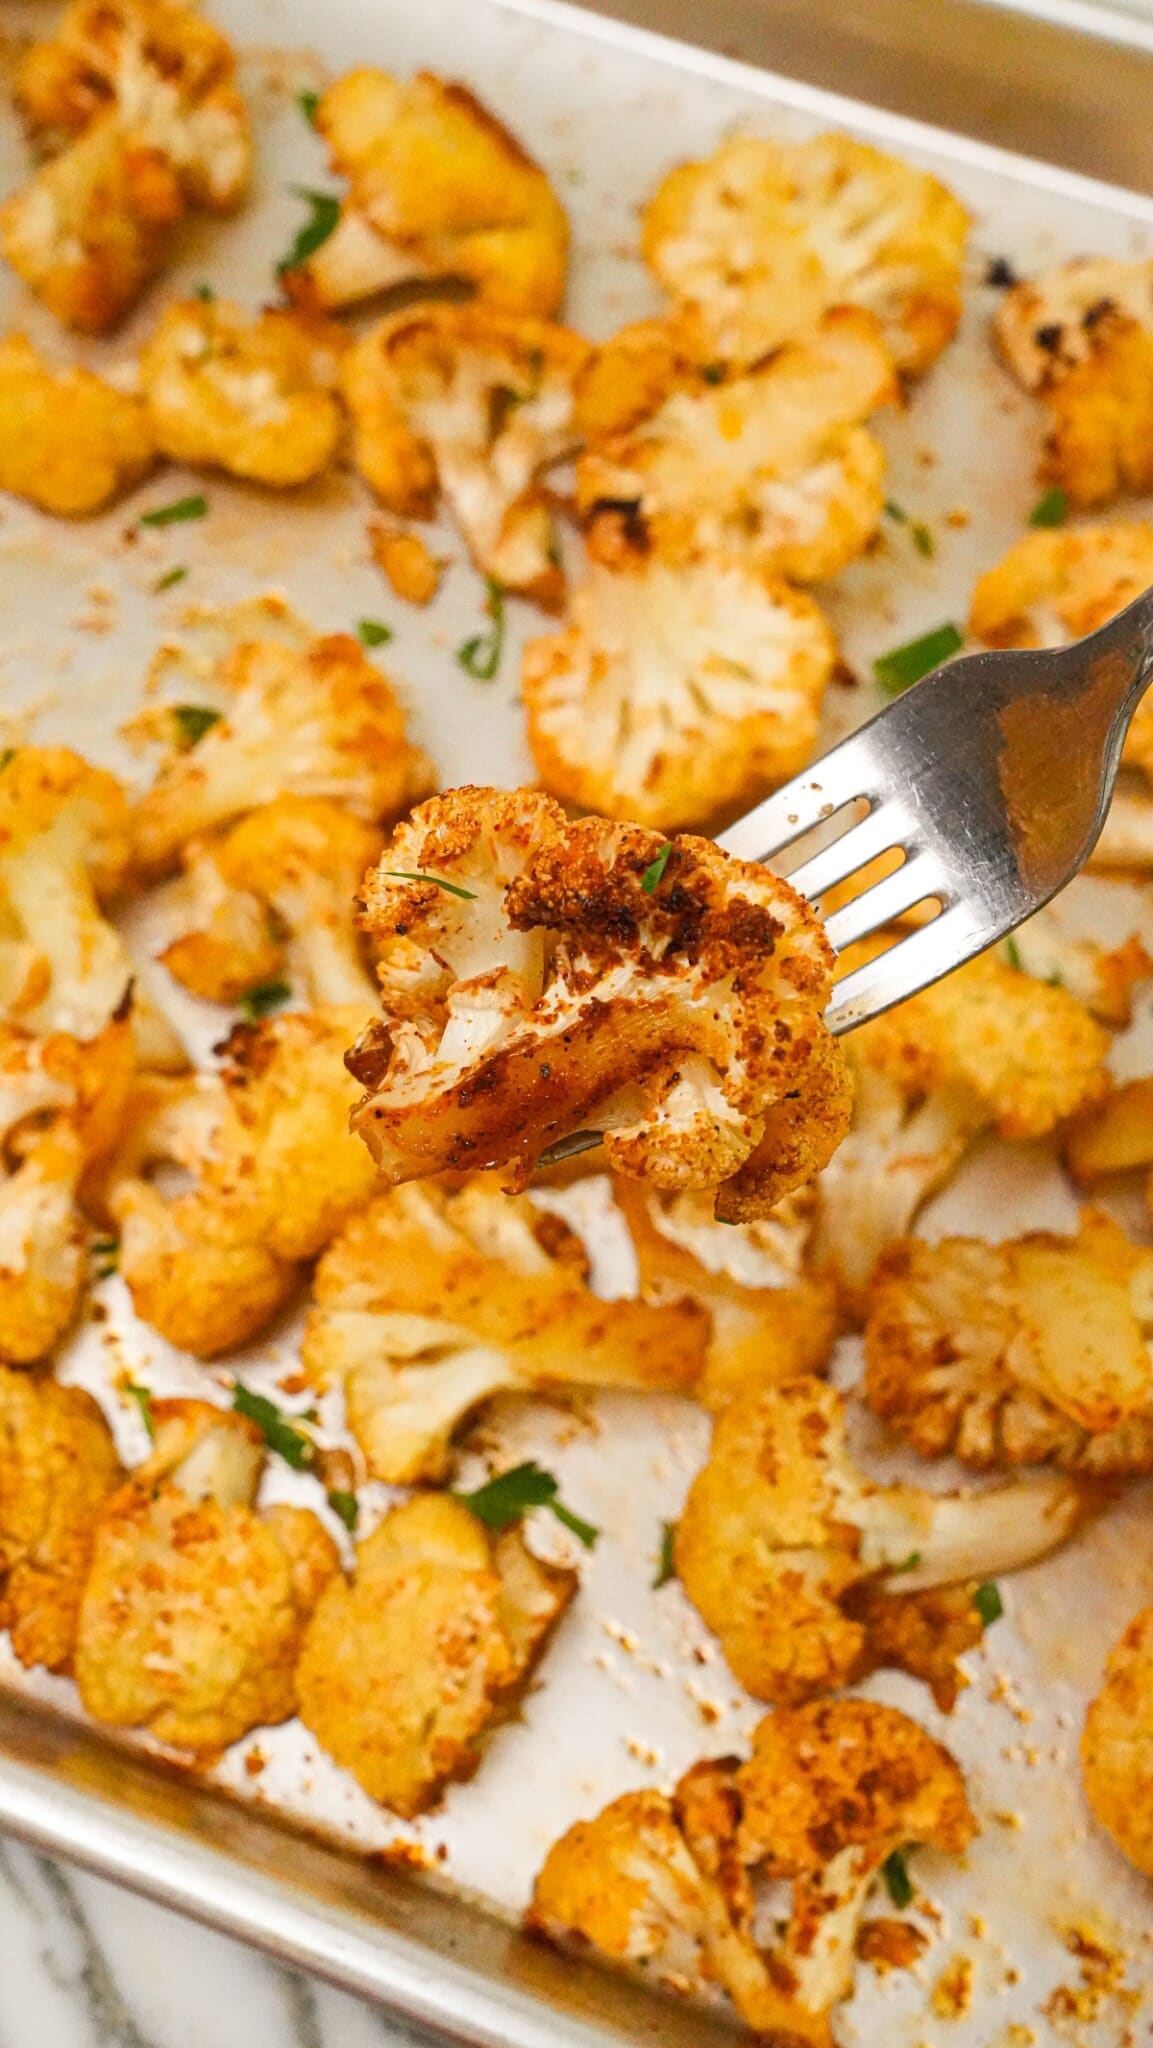 A piece of roasted cauliflower on a fork over a tray of cooked cauliflower.